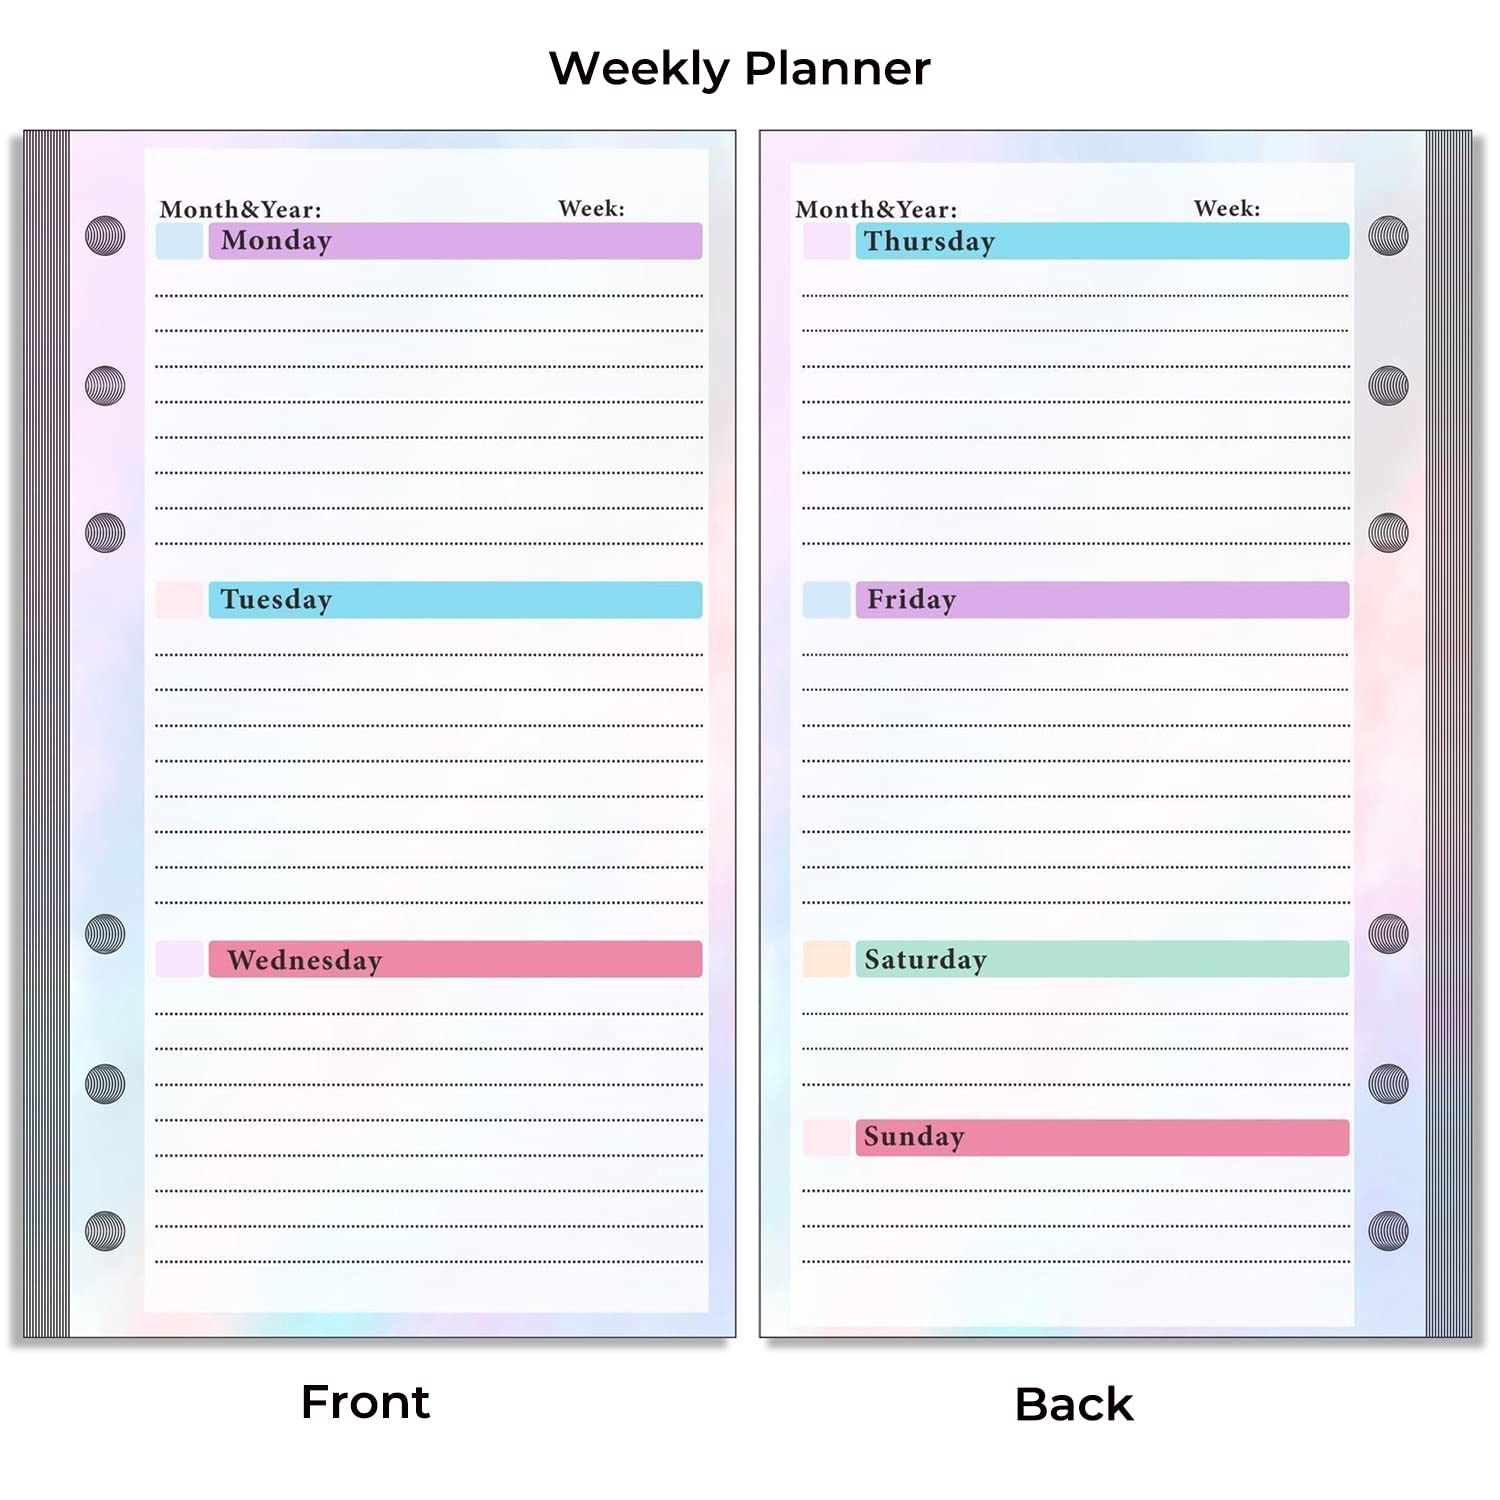 A6 Budget Planner Refill, Prefdo 82 Sheets Weekly Planner Monthly Calendar Inserts 6-Hole Budget Planner for A6 Budget Binder Cover, Binder Money Organizer for Cash, Saving (Set 2)